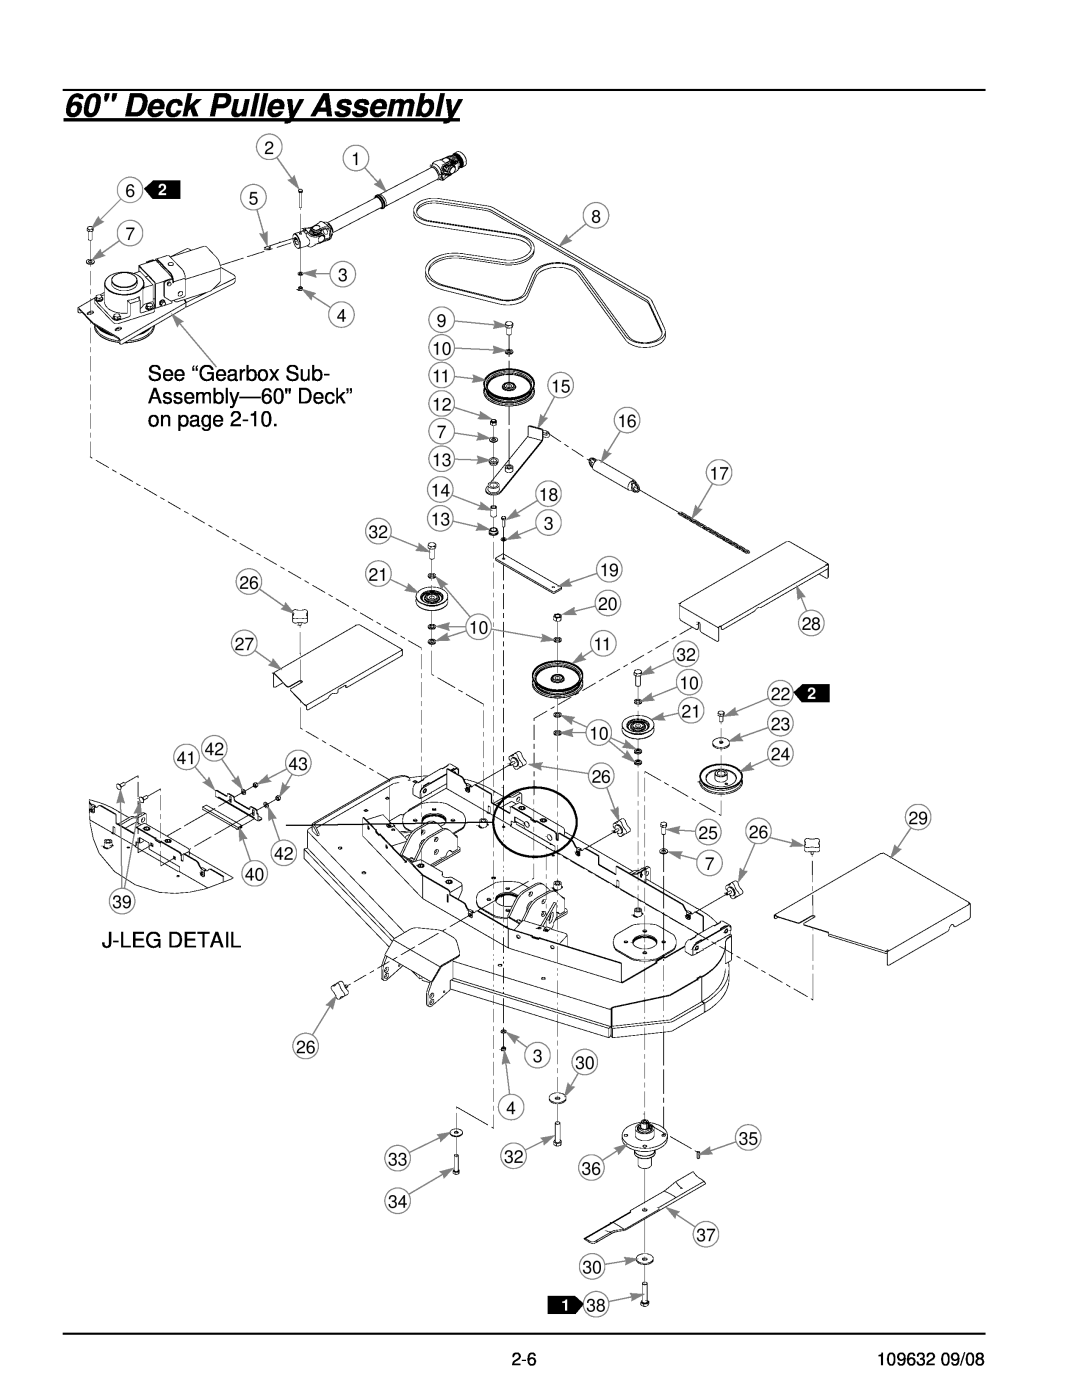 Hustler Turf 928739, 928721 manual Deck Pulley Assembly, See “Gearbox Sub- Assembly-60 Deck” on page, J-Leg Detail 